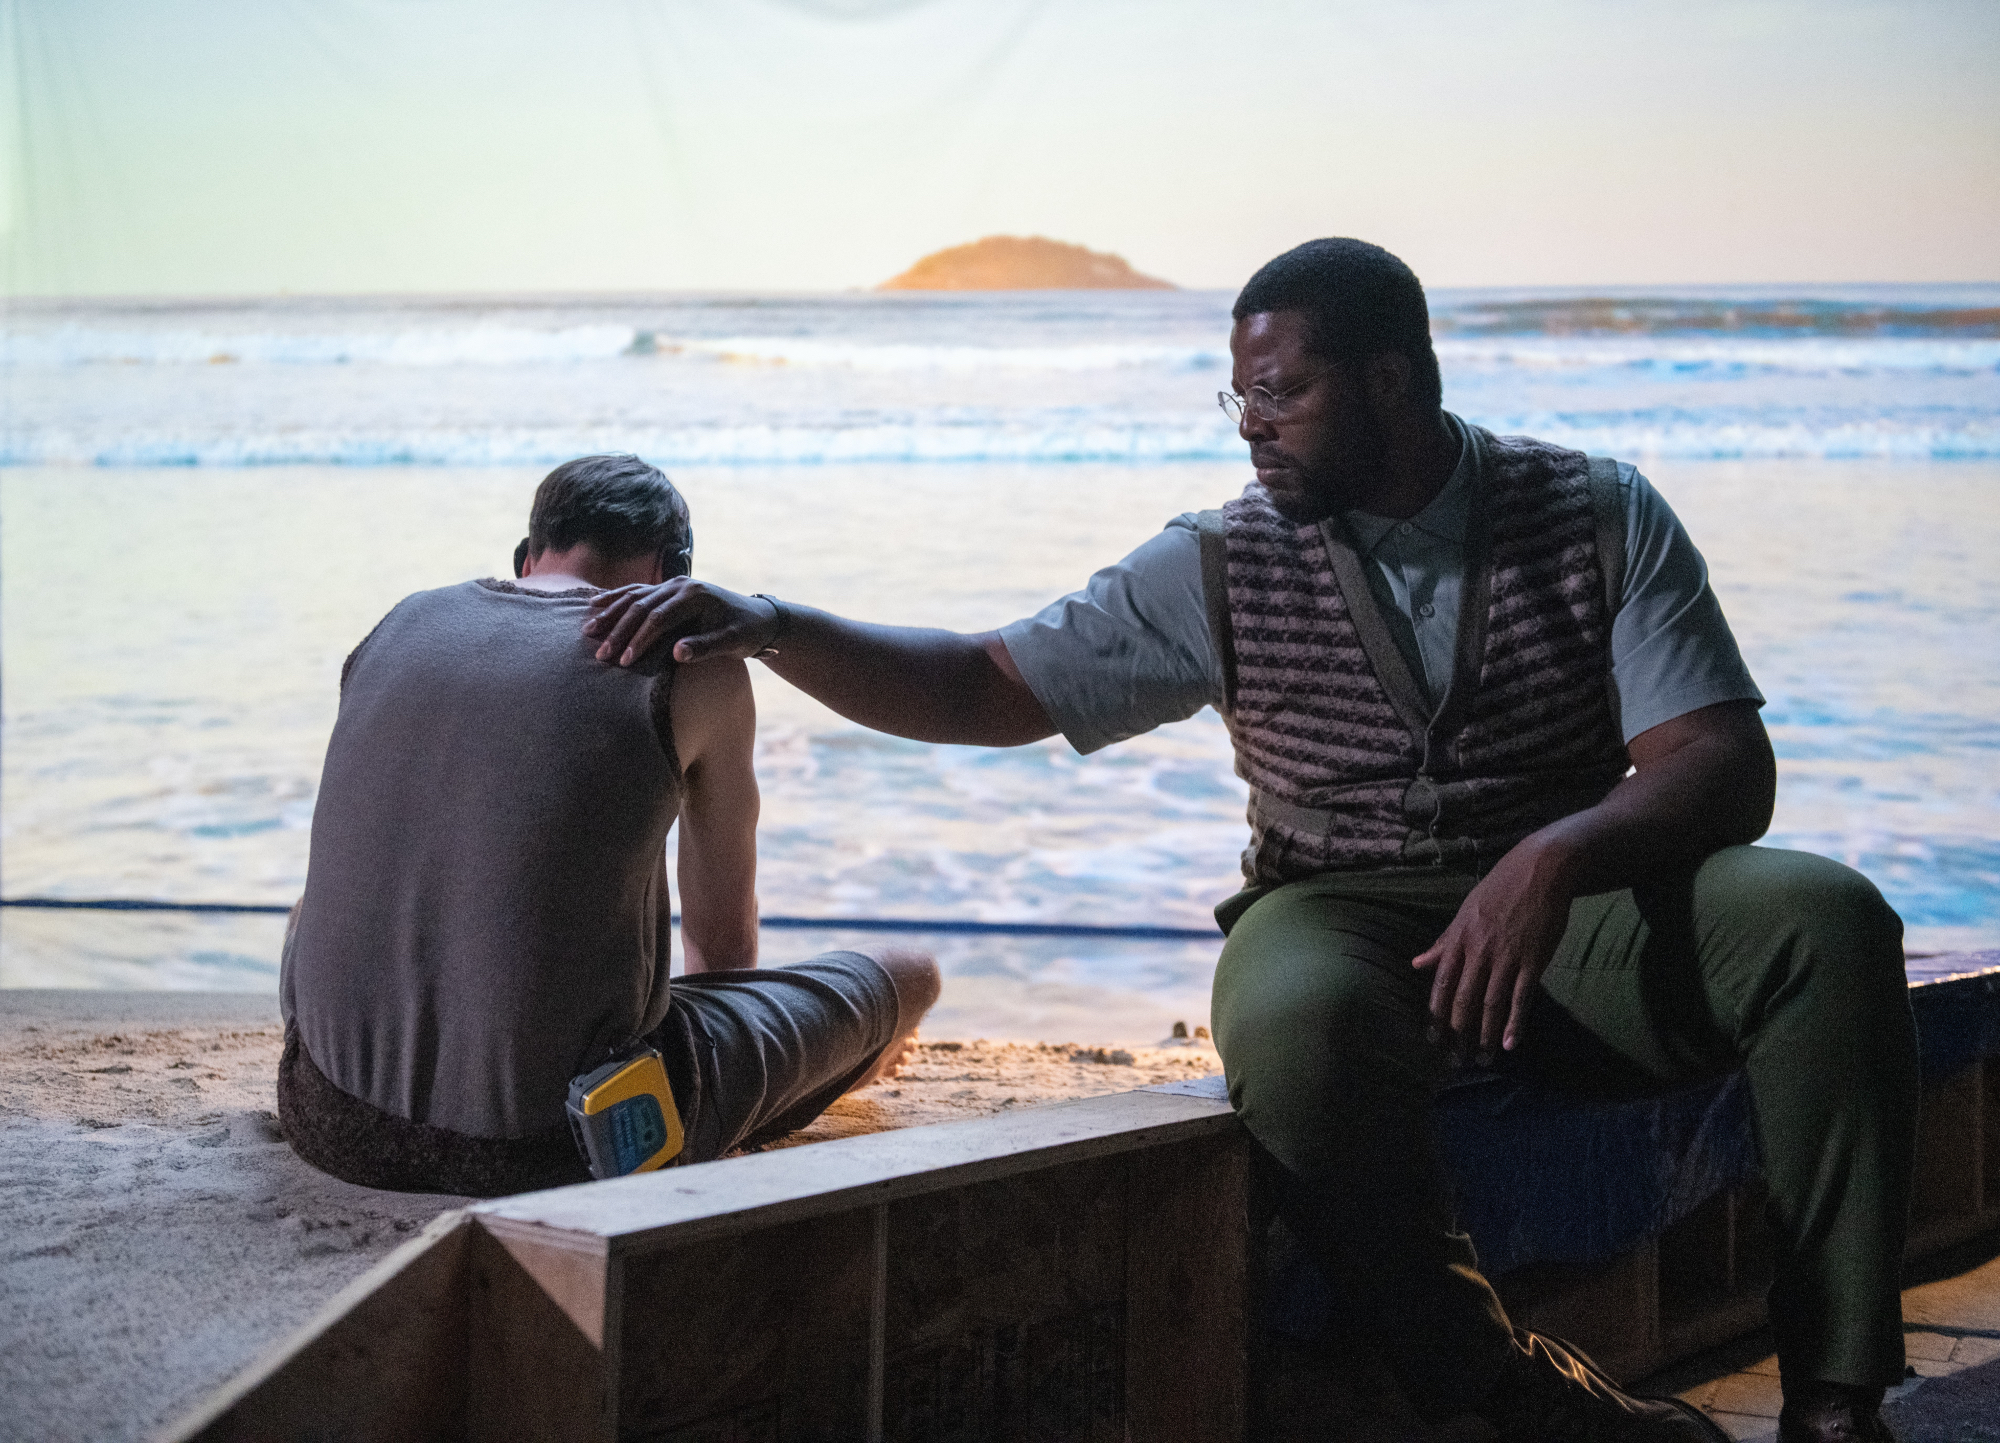 'Nine Day's David Rysdahl as Mike and Winston Duke as Will sitting on the beach comforting Mike